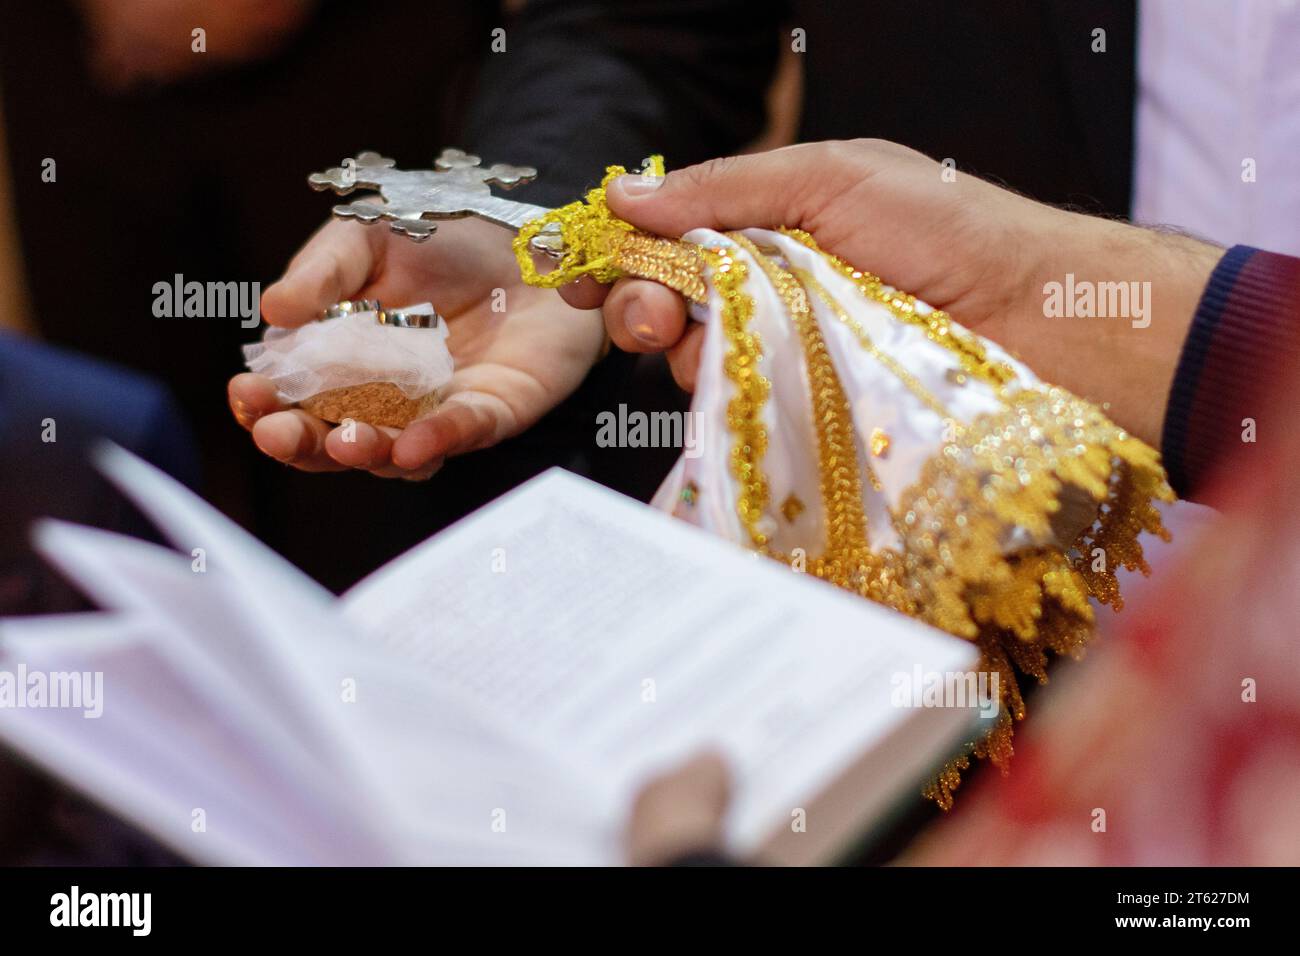 A close-up image of two hands in golden lace and a white shawl cradling an open Bible Stock Photo